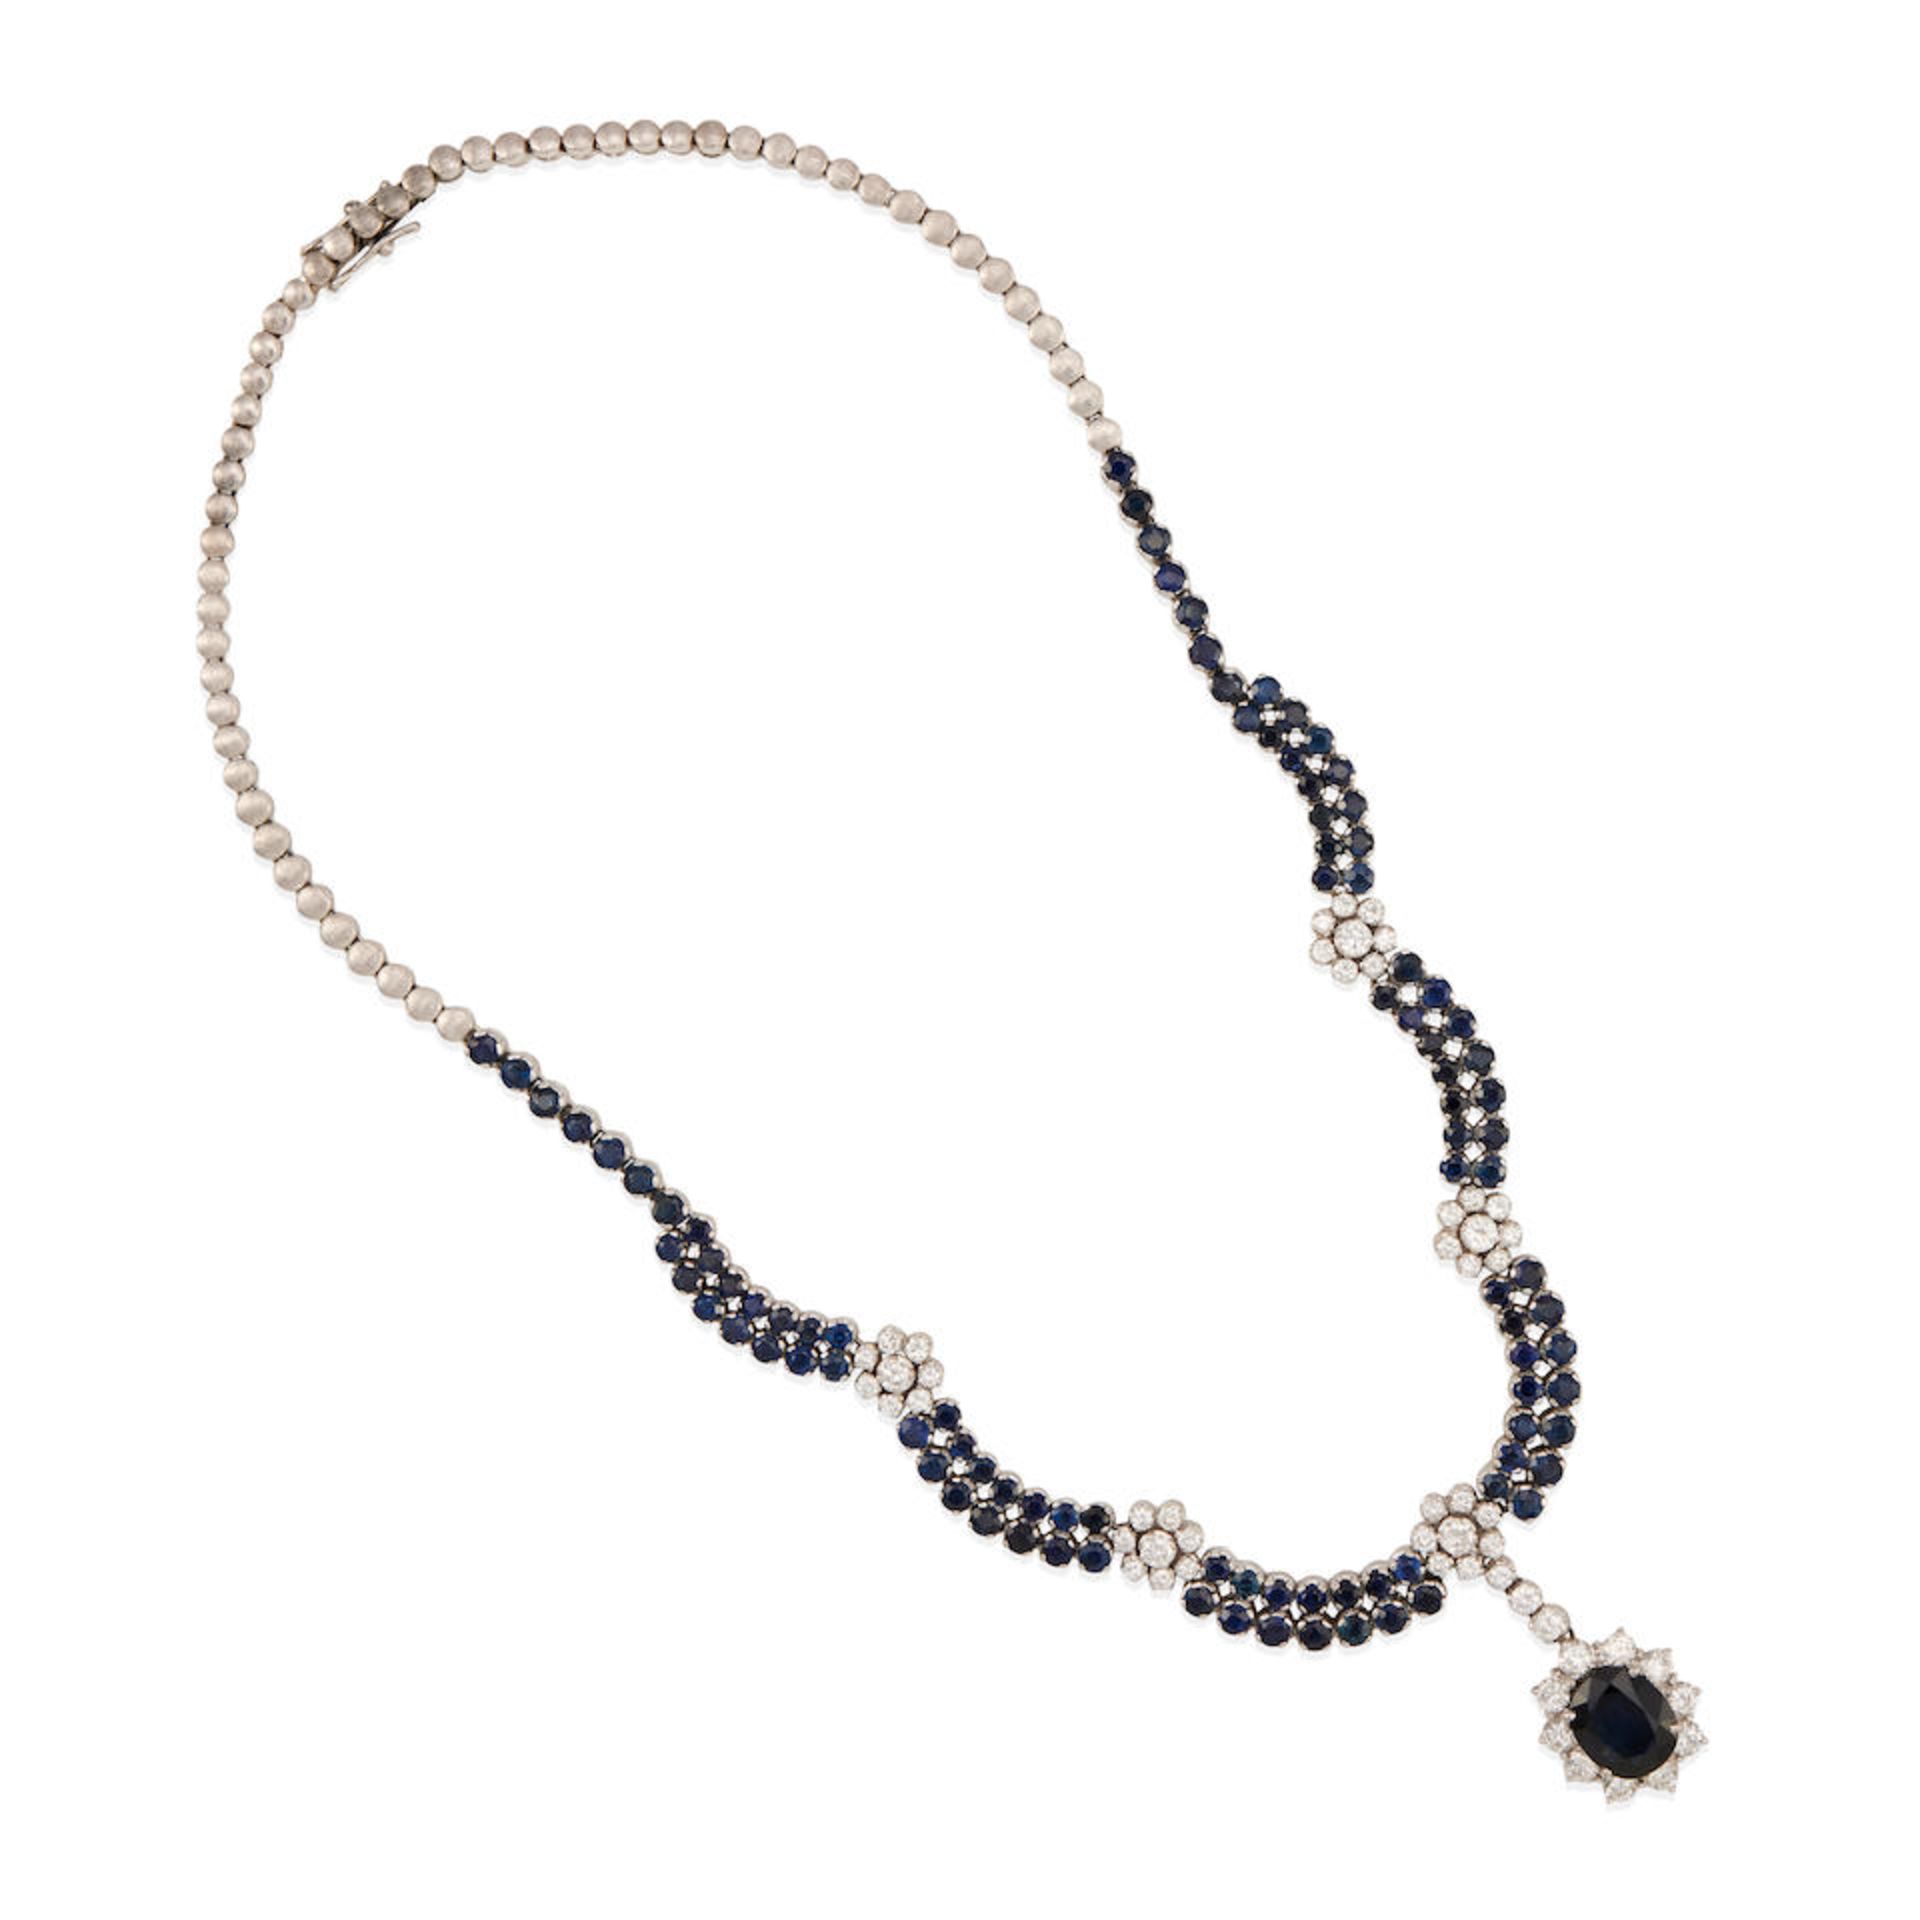 AN 18K WHITE GOLD, DIAMOND, AND SAPPHIRE PENDANT NECKLACE